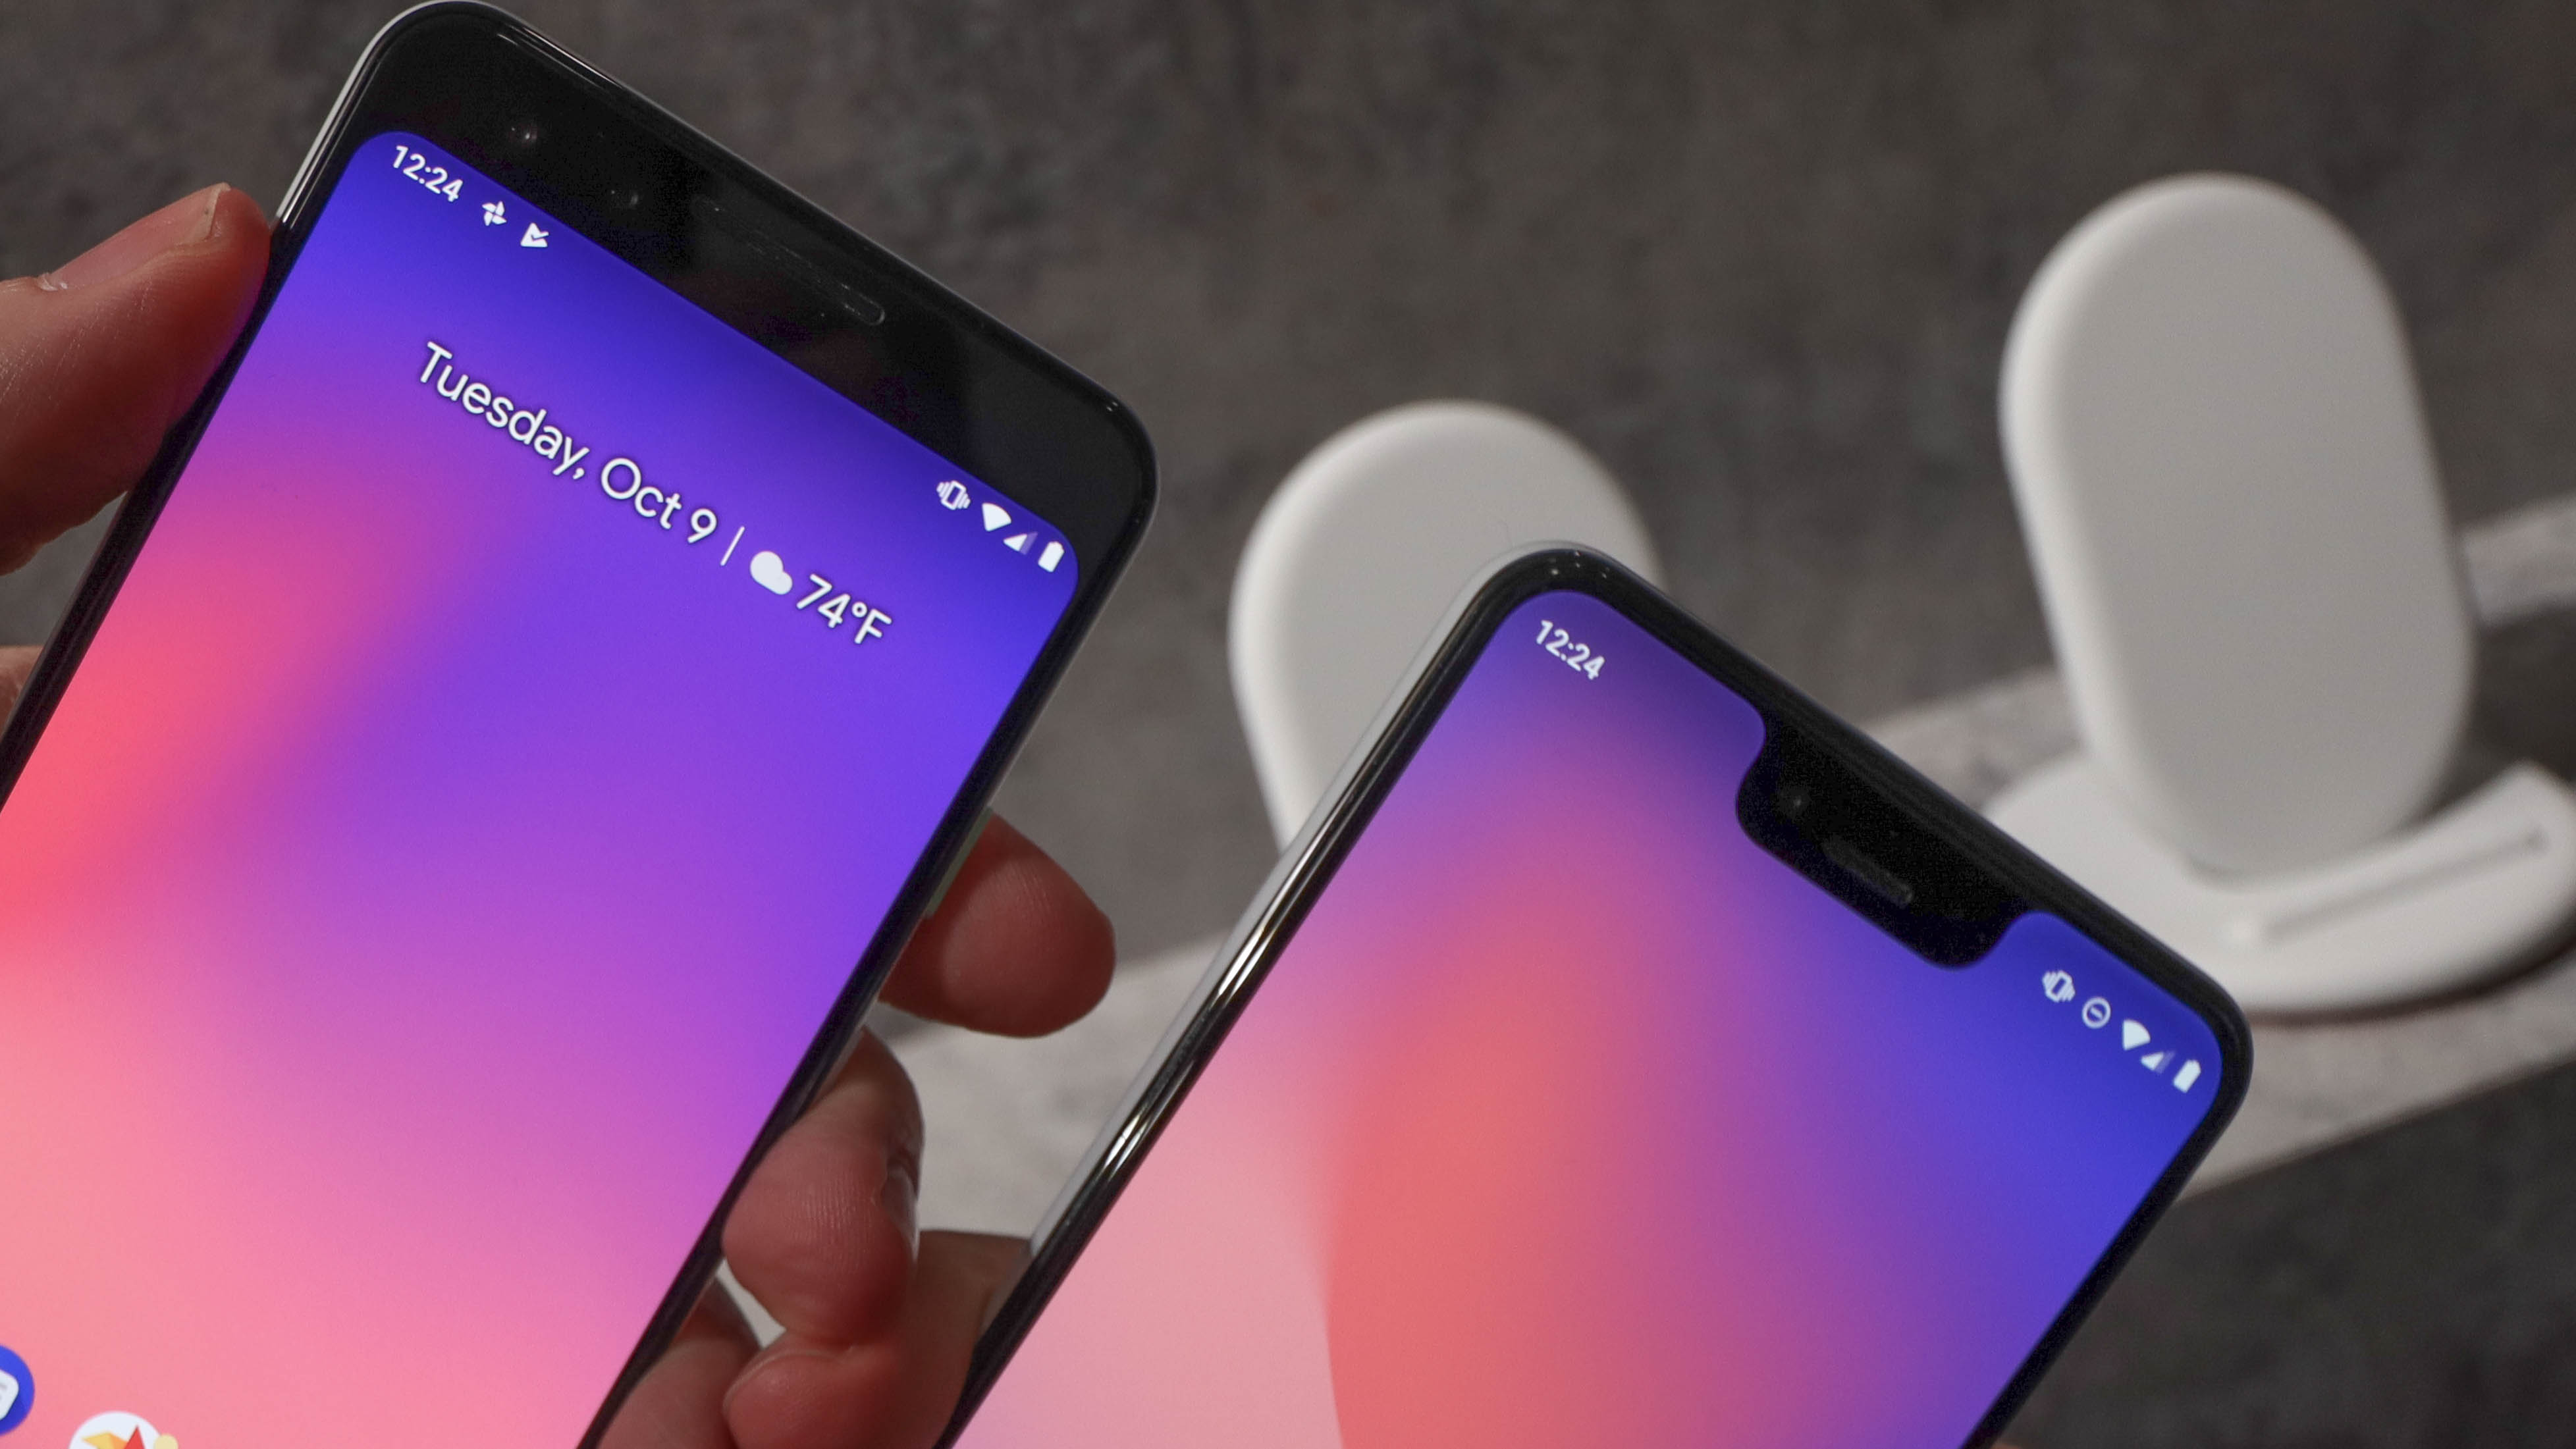 The notch is a big change for the Google Pixel 3 XL's screen